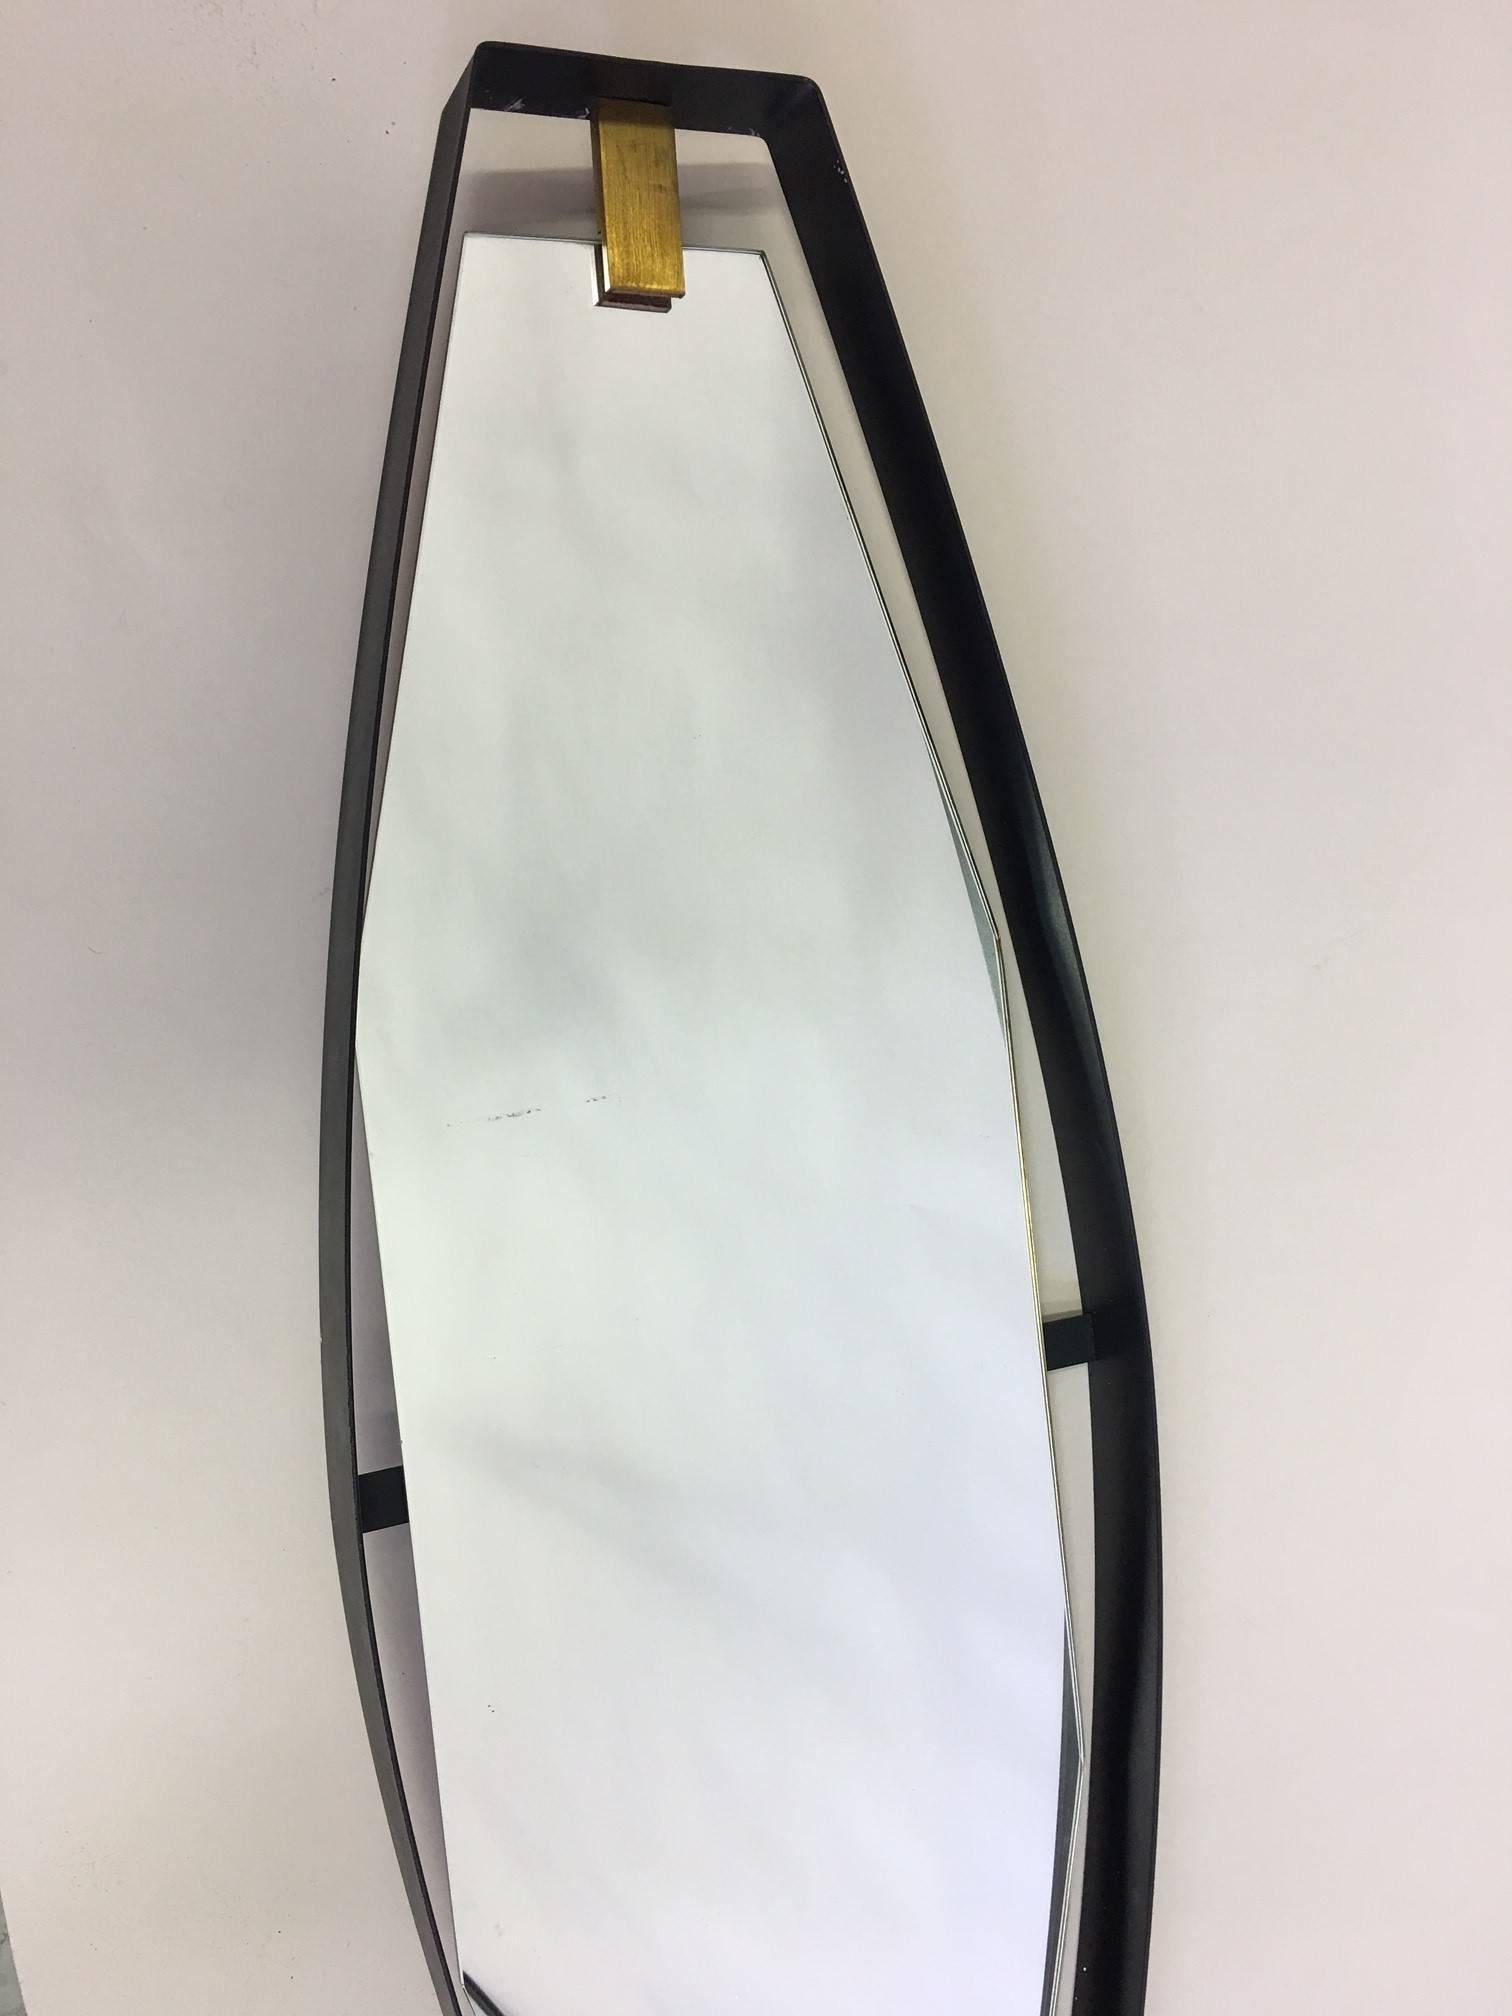 2 Rare Italian Mid-Century Modern Mirrors, Attr. to Max Ingrand for Fontana Arte In Good Condition For Sale In New York, NY